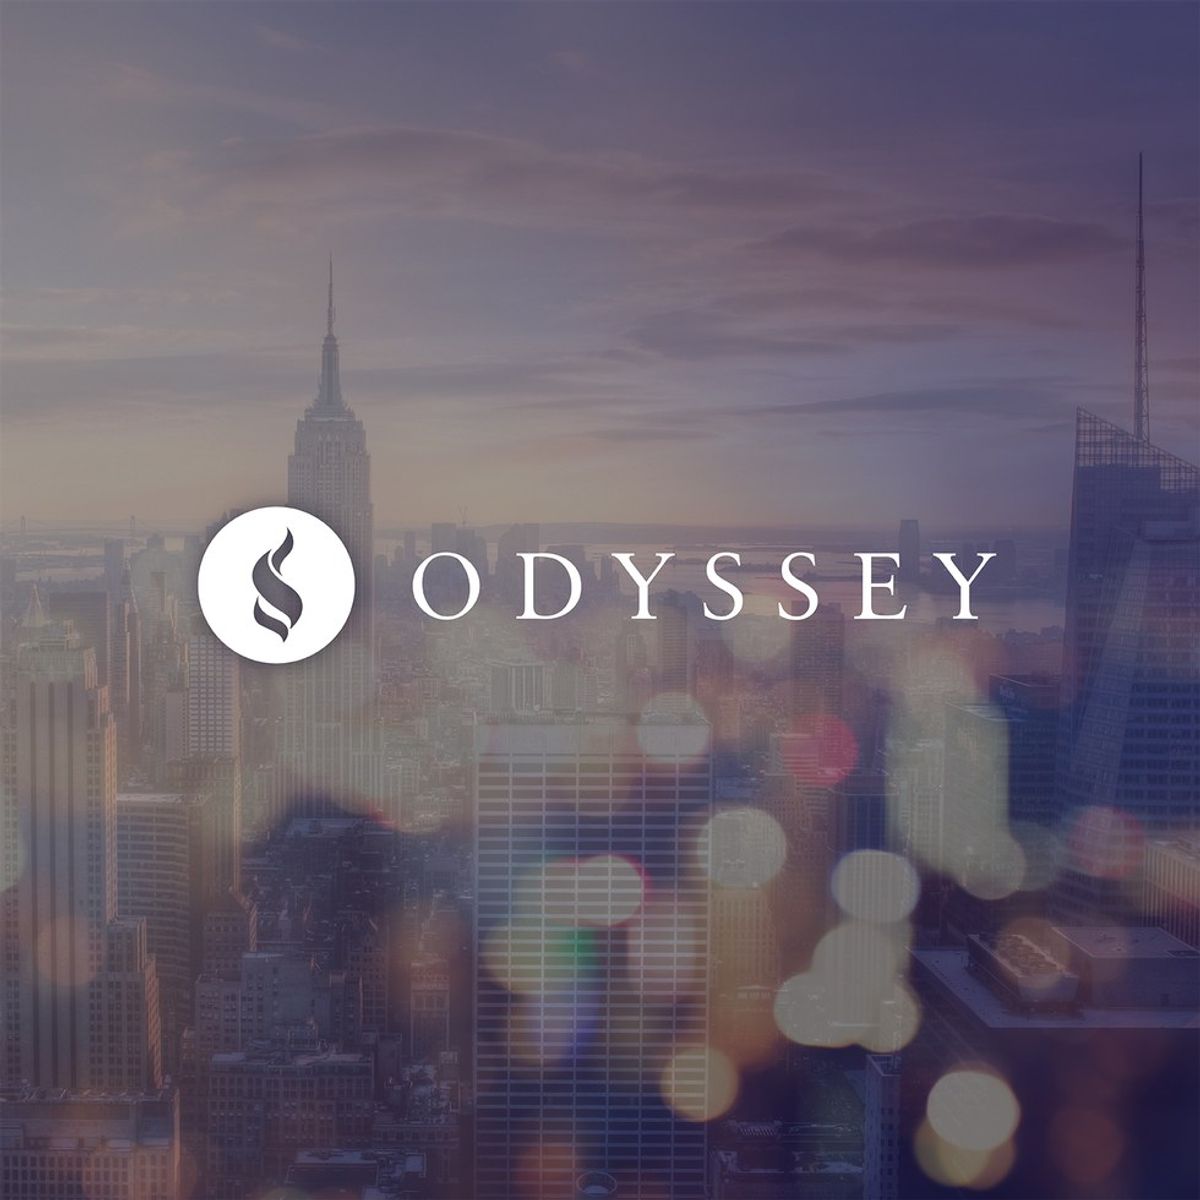 My Year With Odyssey